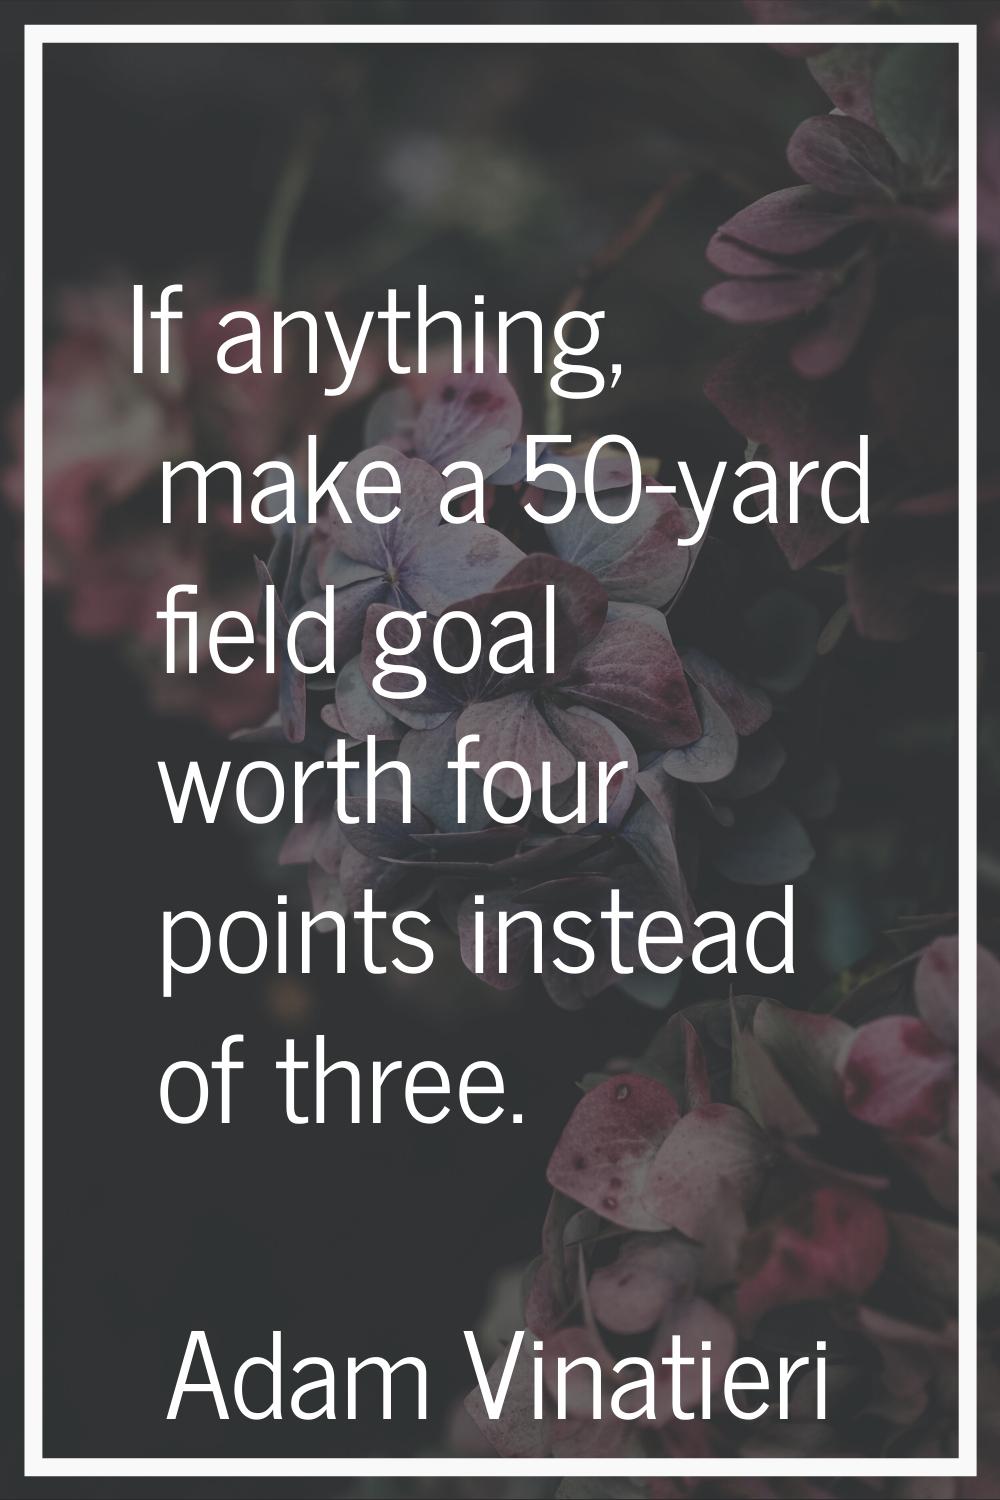 If anything, make a 50-yard field goal worth four points instead of three.